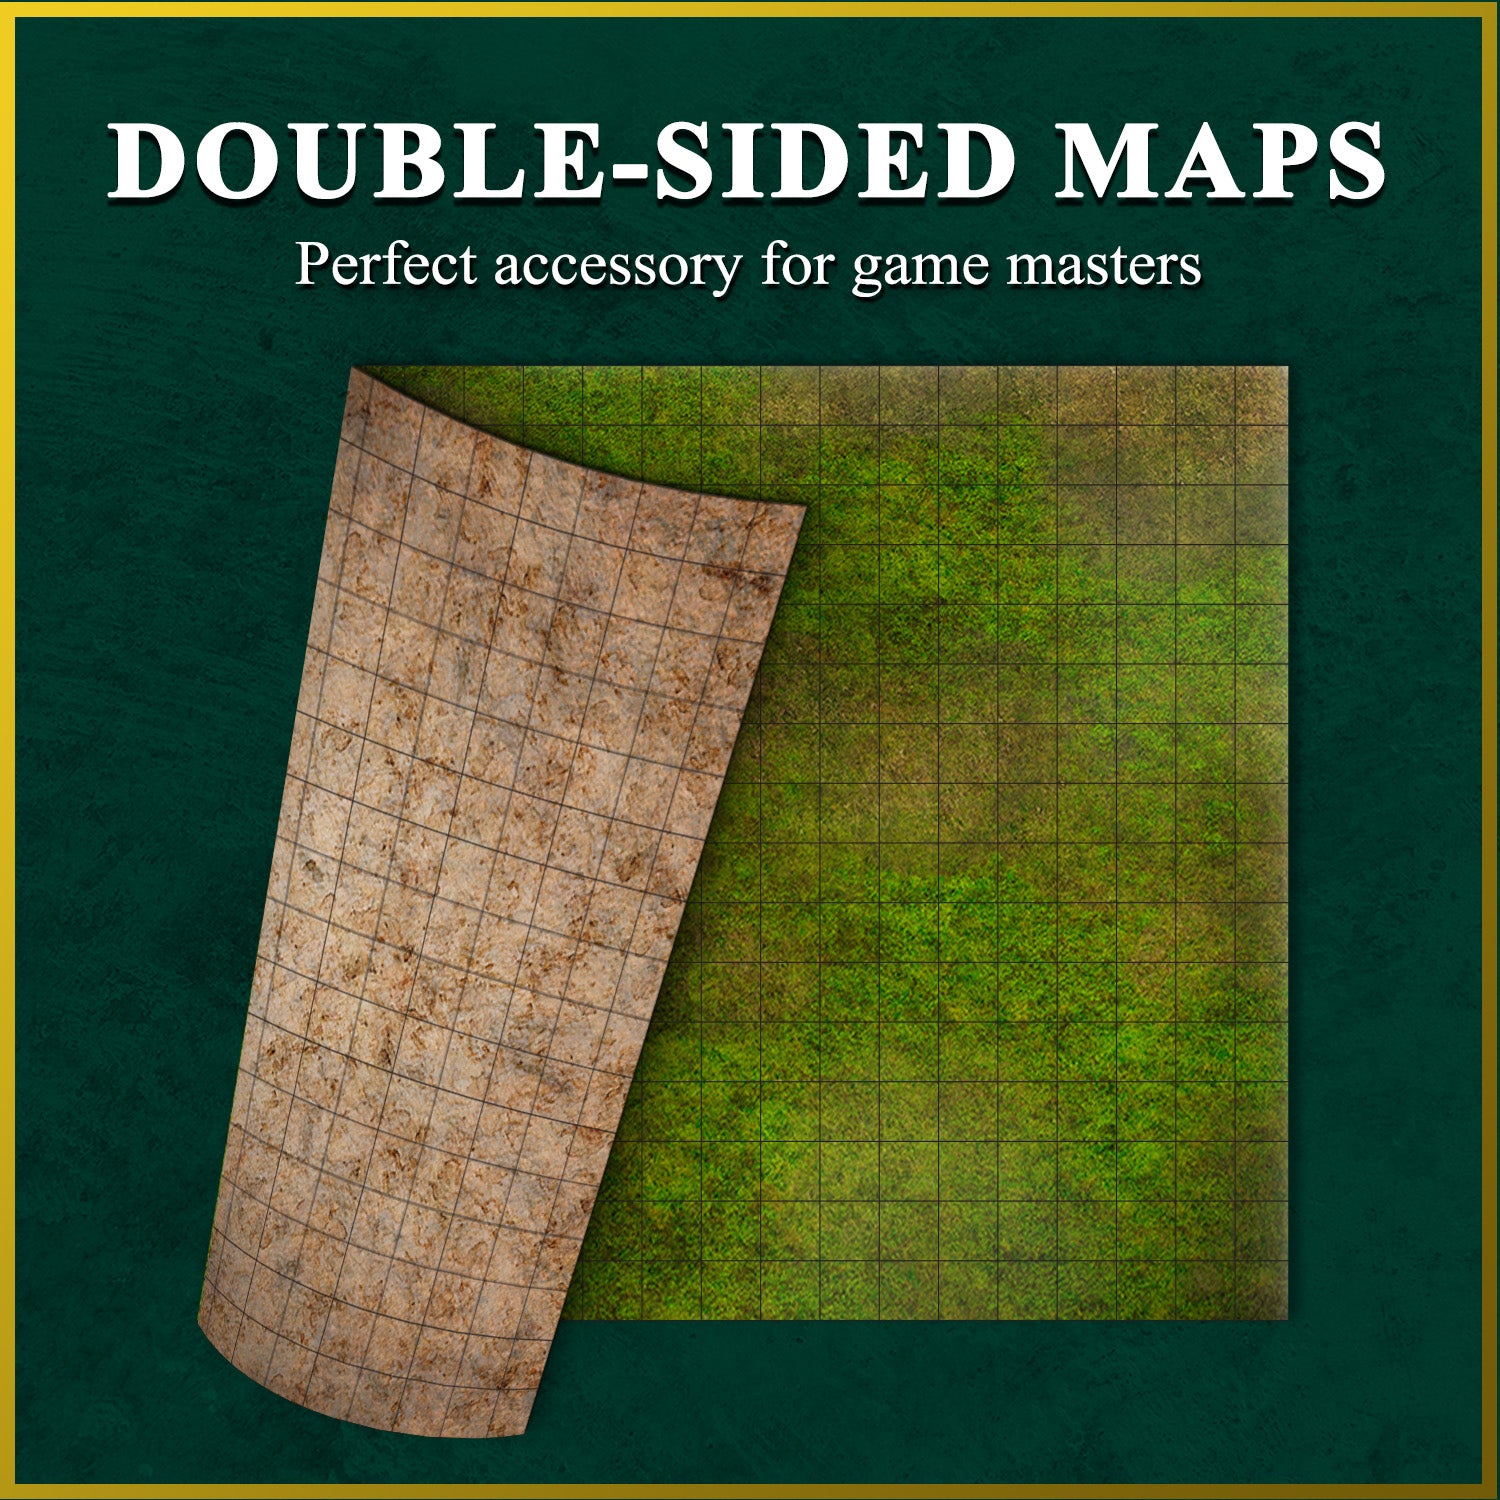 Game Knight Encounters - Map Pack by Adventurers & Adversaries (4 Maps per pack)